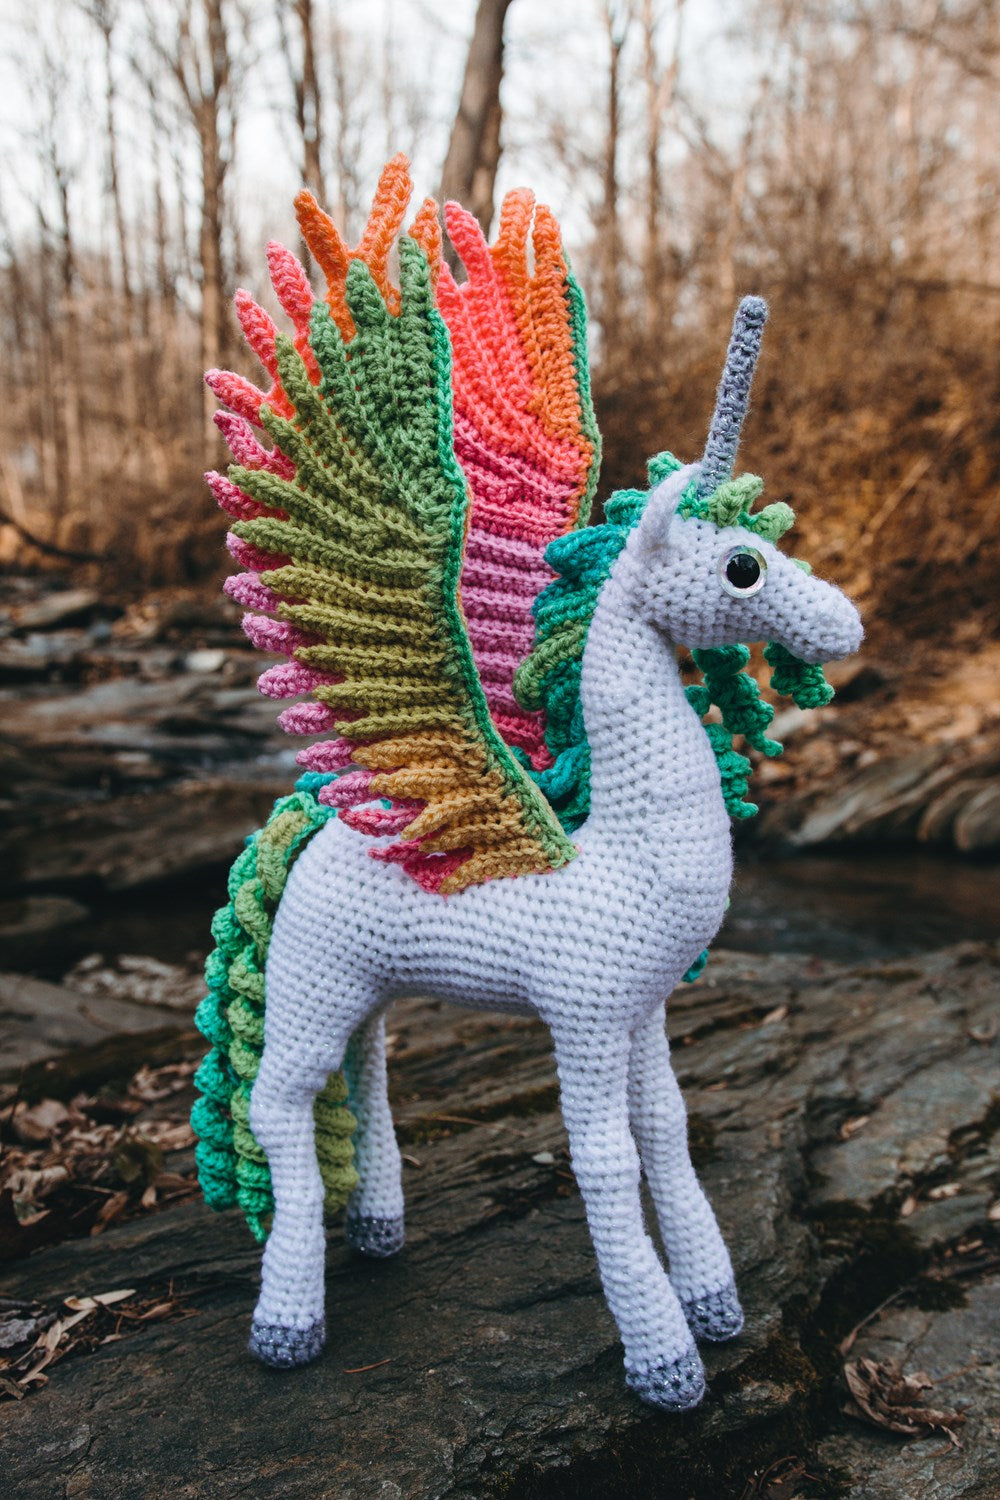 Crochet Creatures of Myth and Legend by Megan Lapp